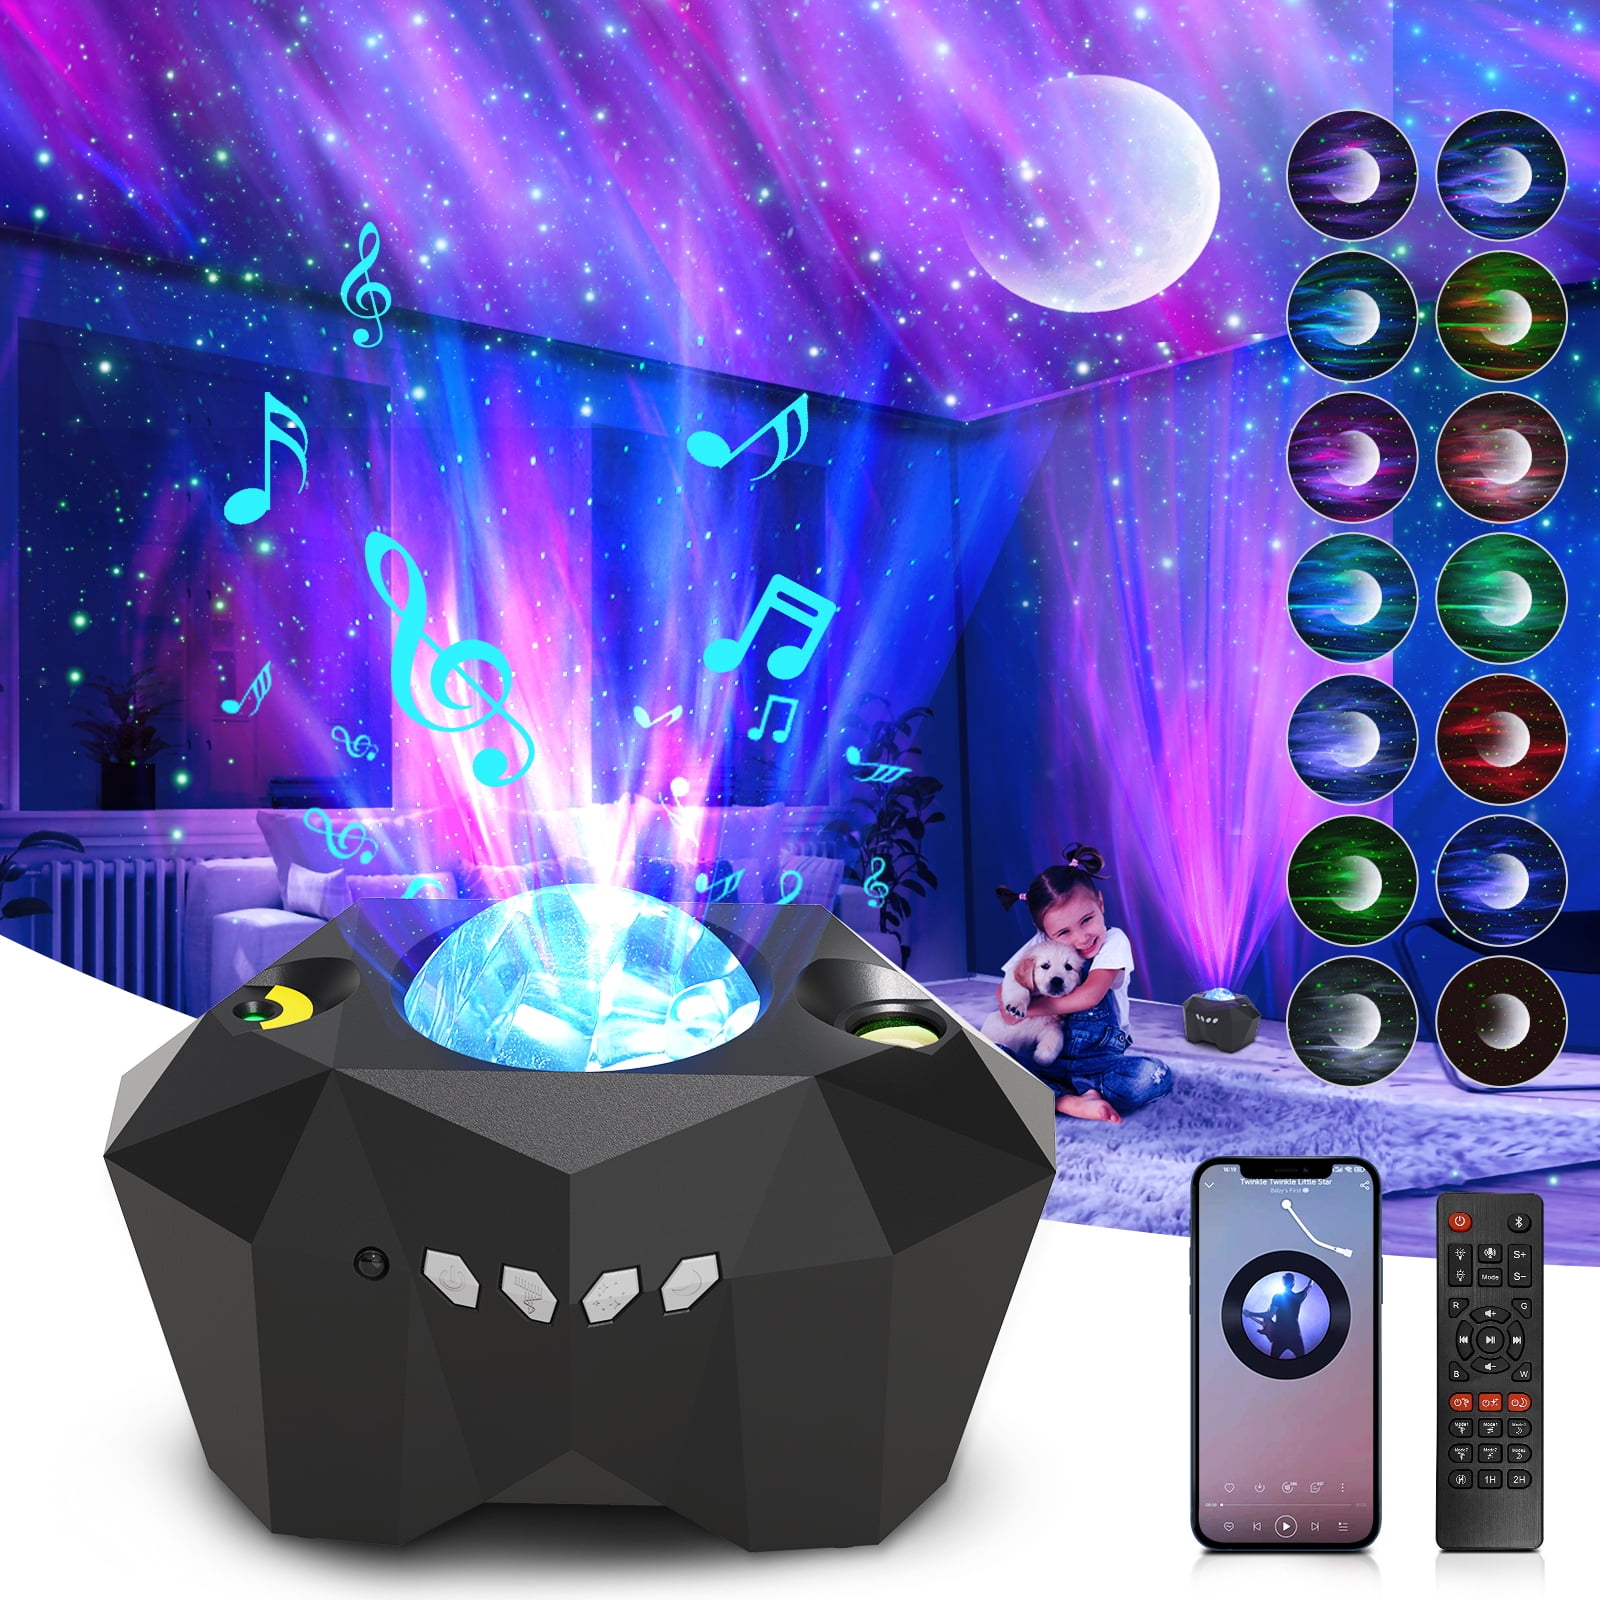 Smart Galaxy Star Projector APP Control Bluetooth Speark LED Colorful  Starry Sky Projector Night Lamp Remote Control for Bedroom